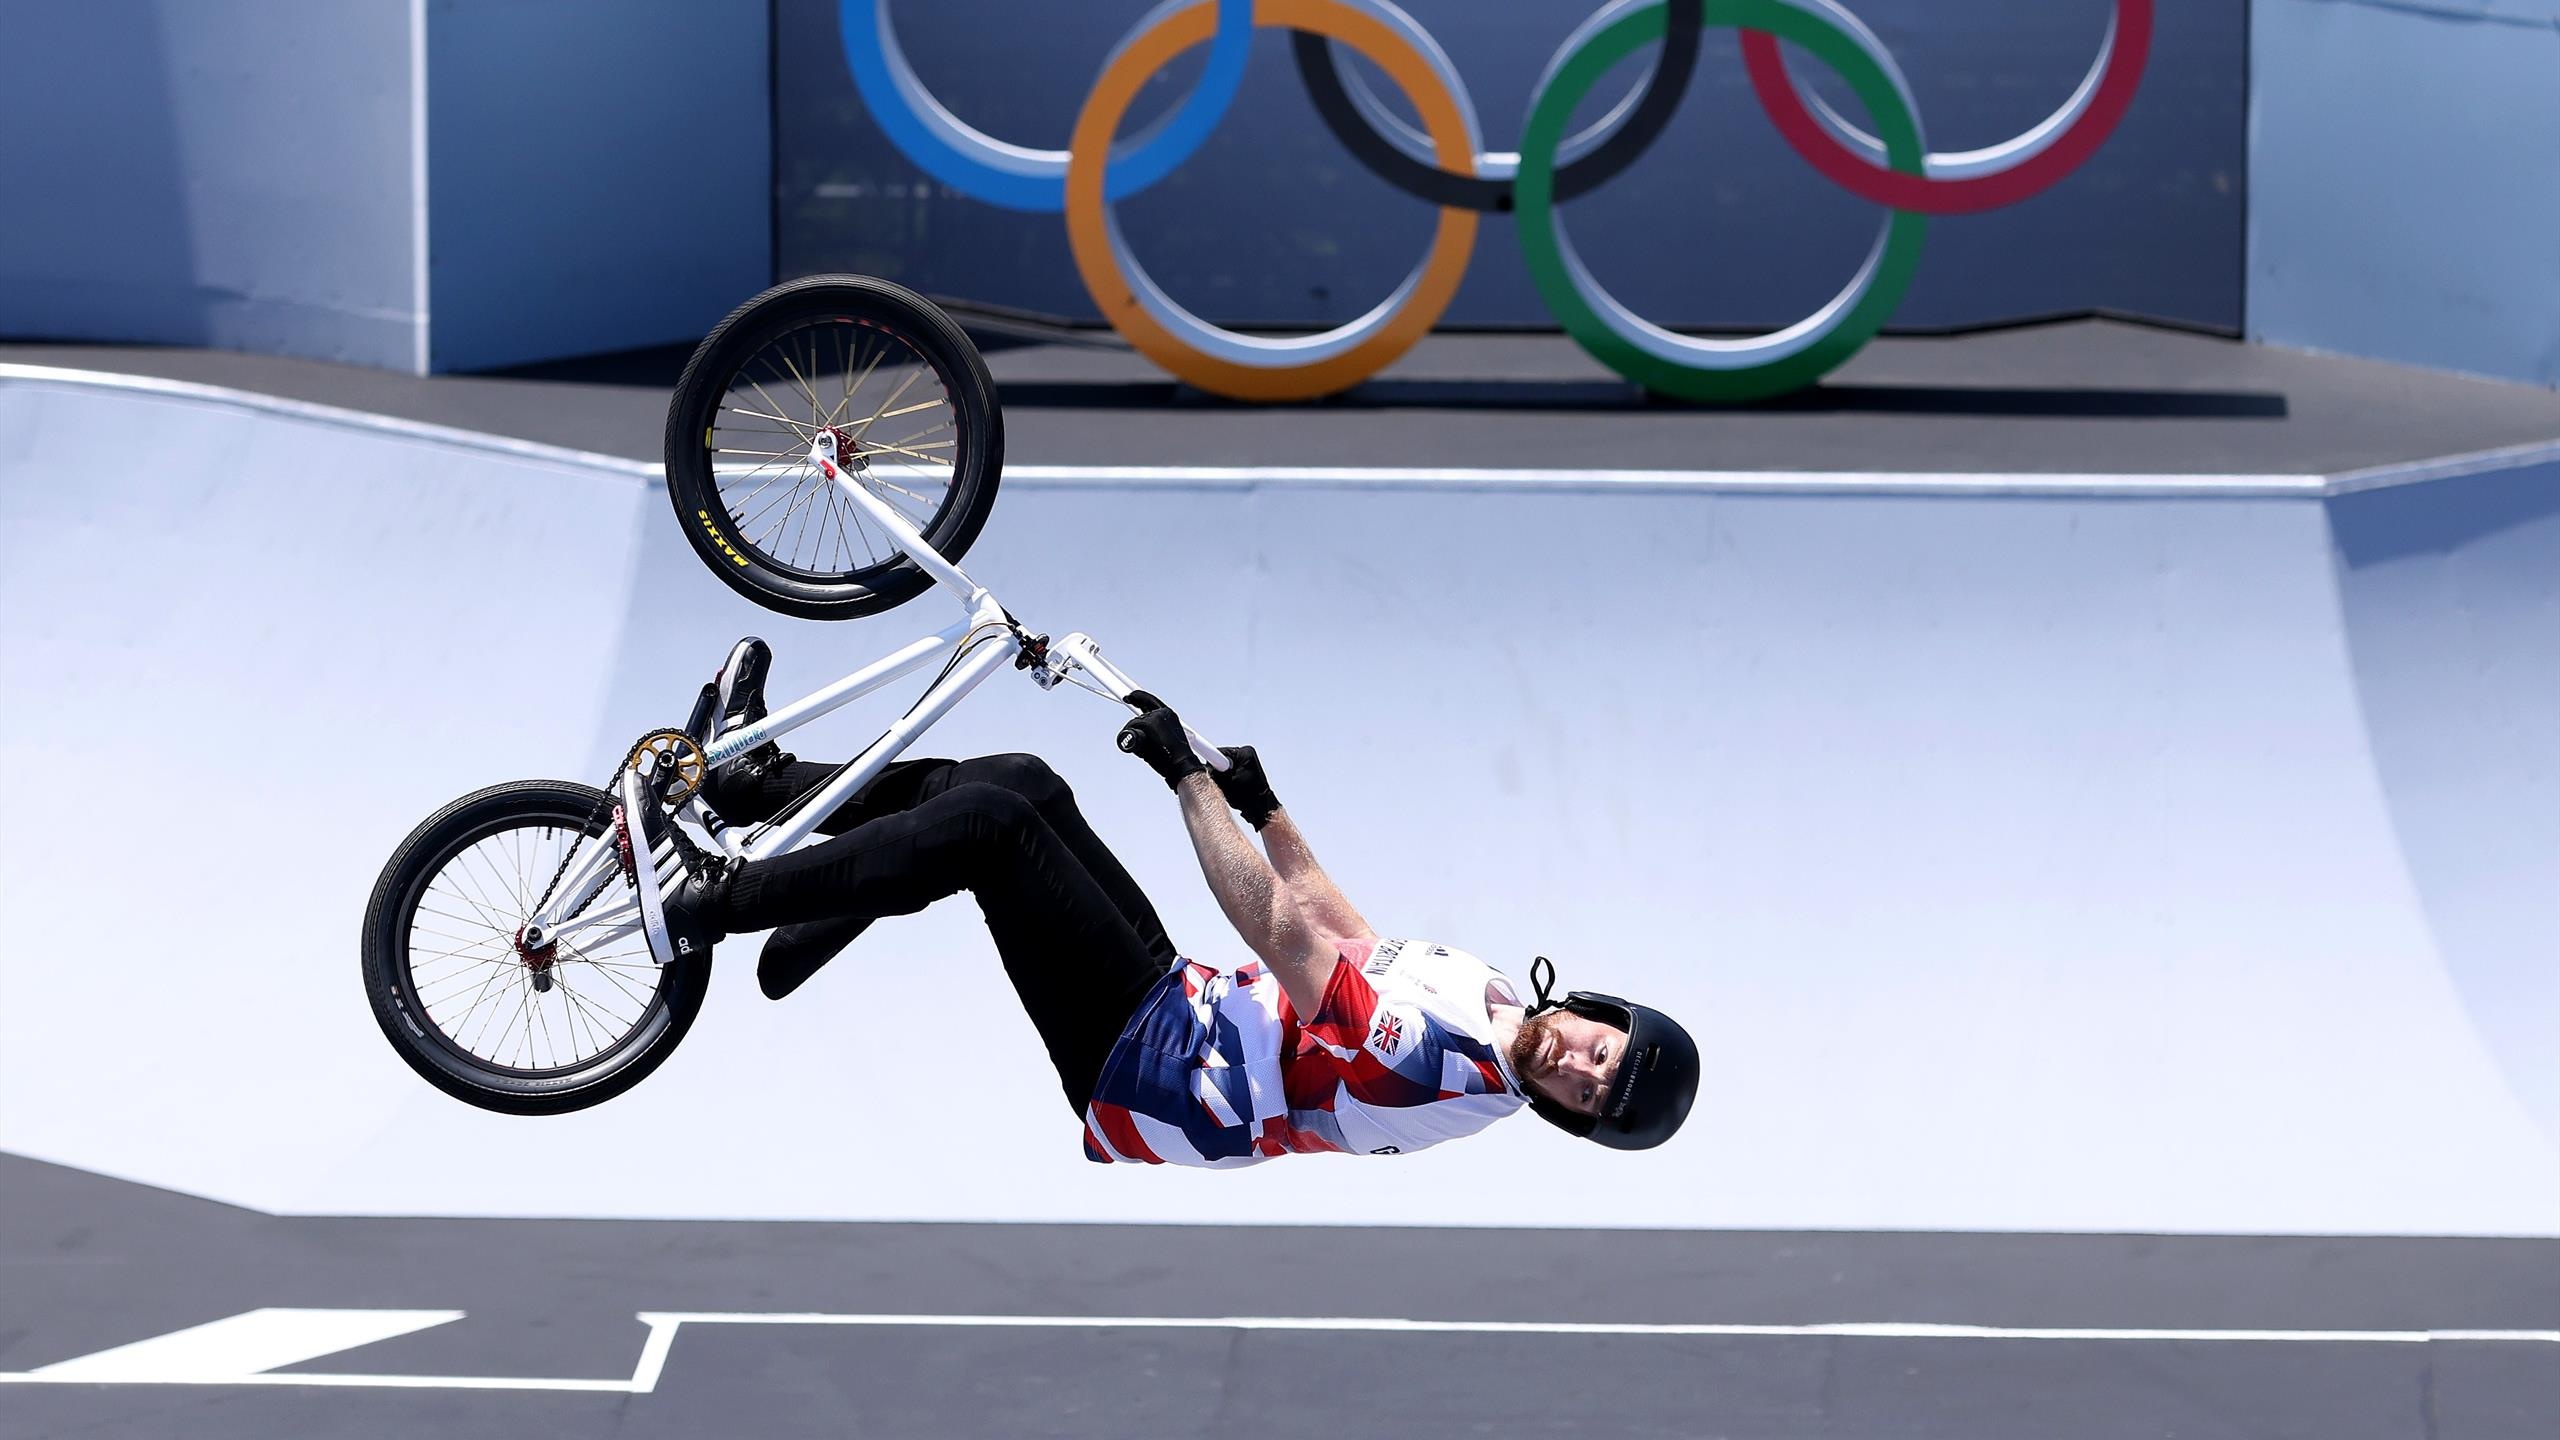 BMX (Sports): Olympic Games In Tokyo, BMX Freestyle Men's Finalist, Extreme Sports. 2560x1440 HD Wallpaper.